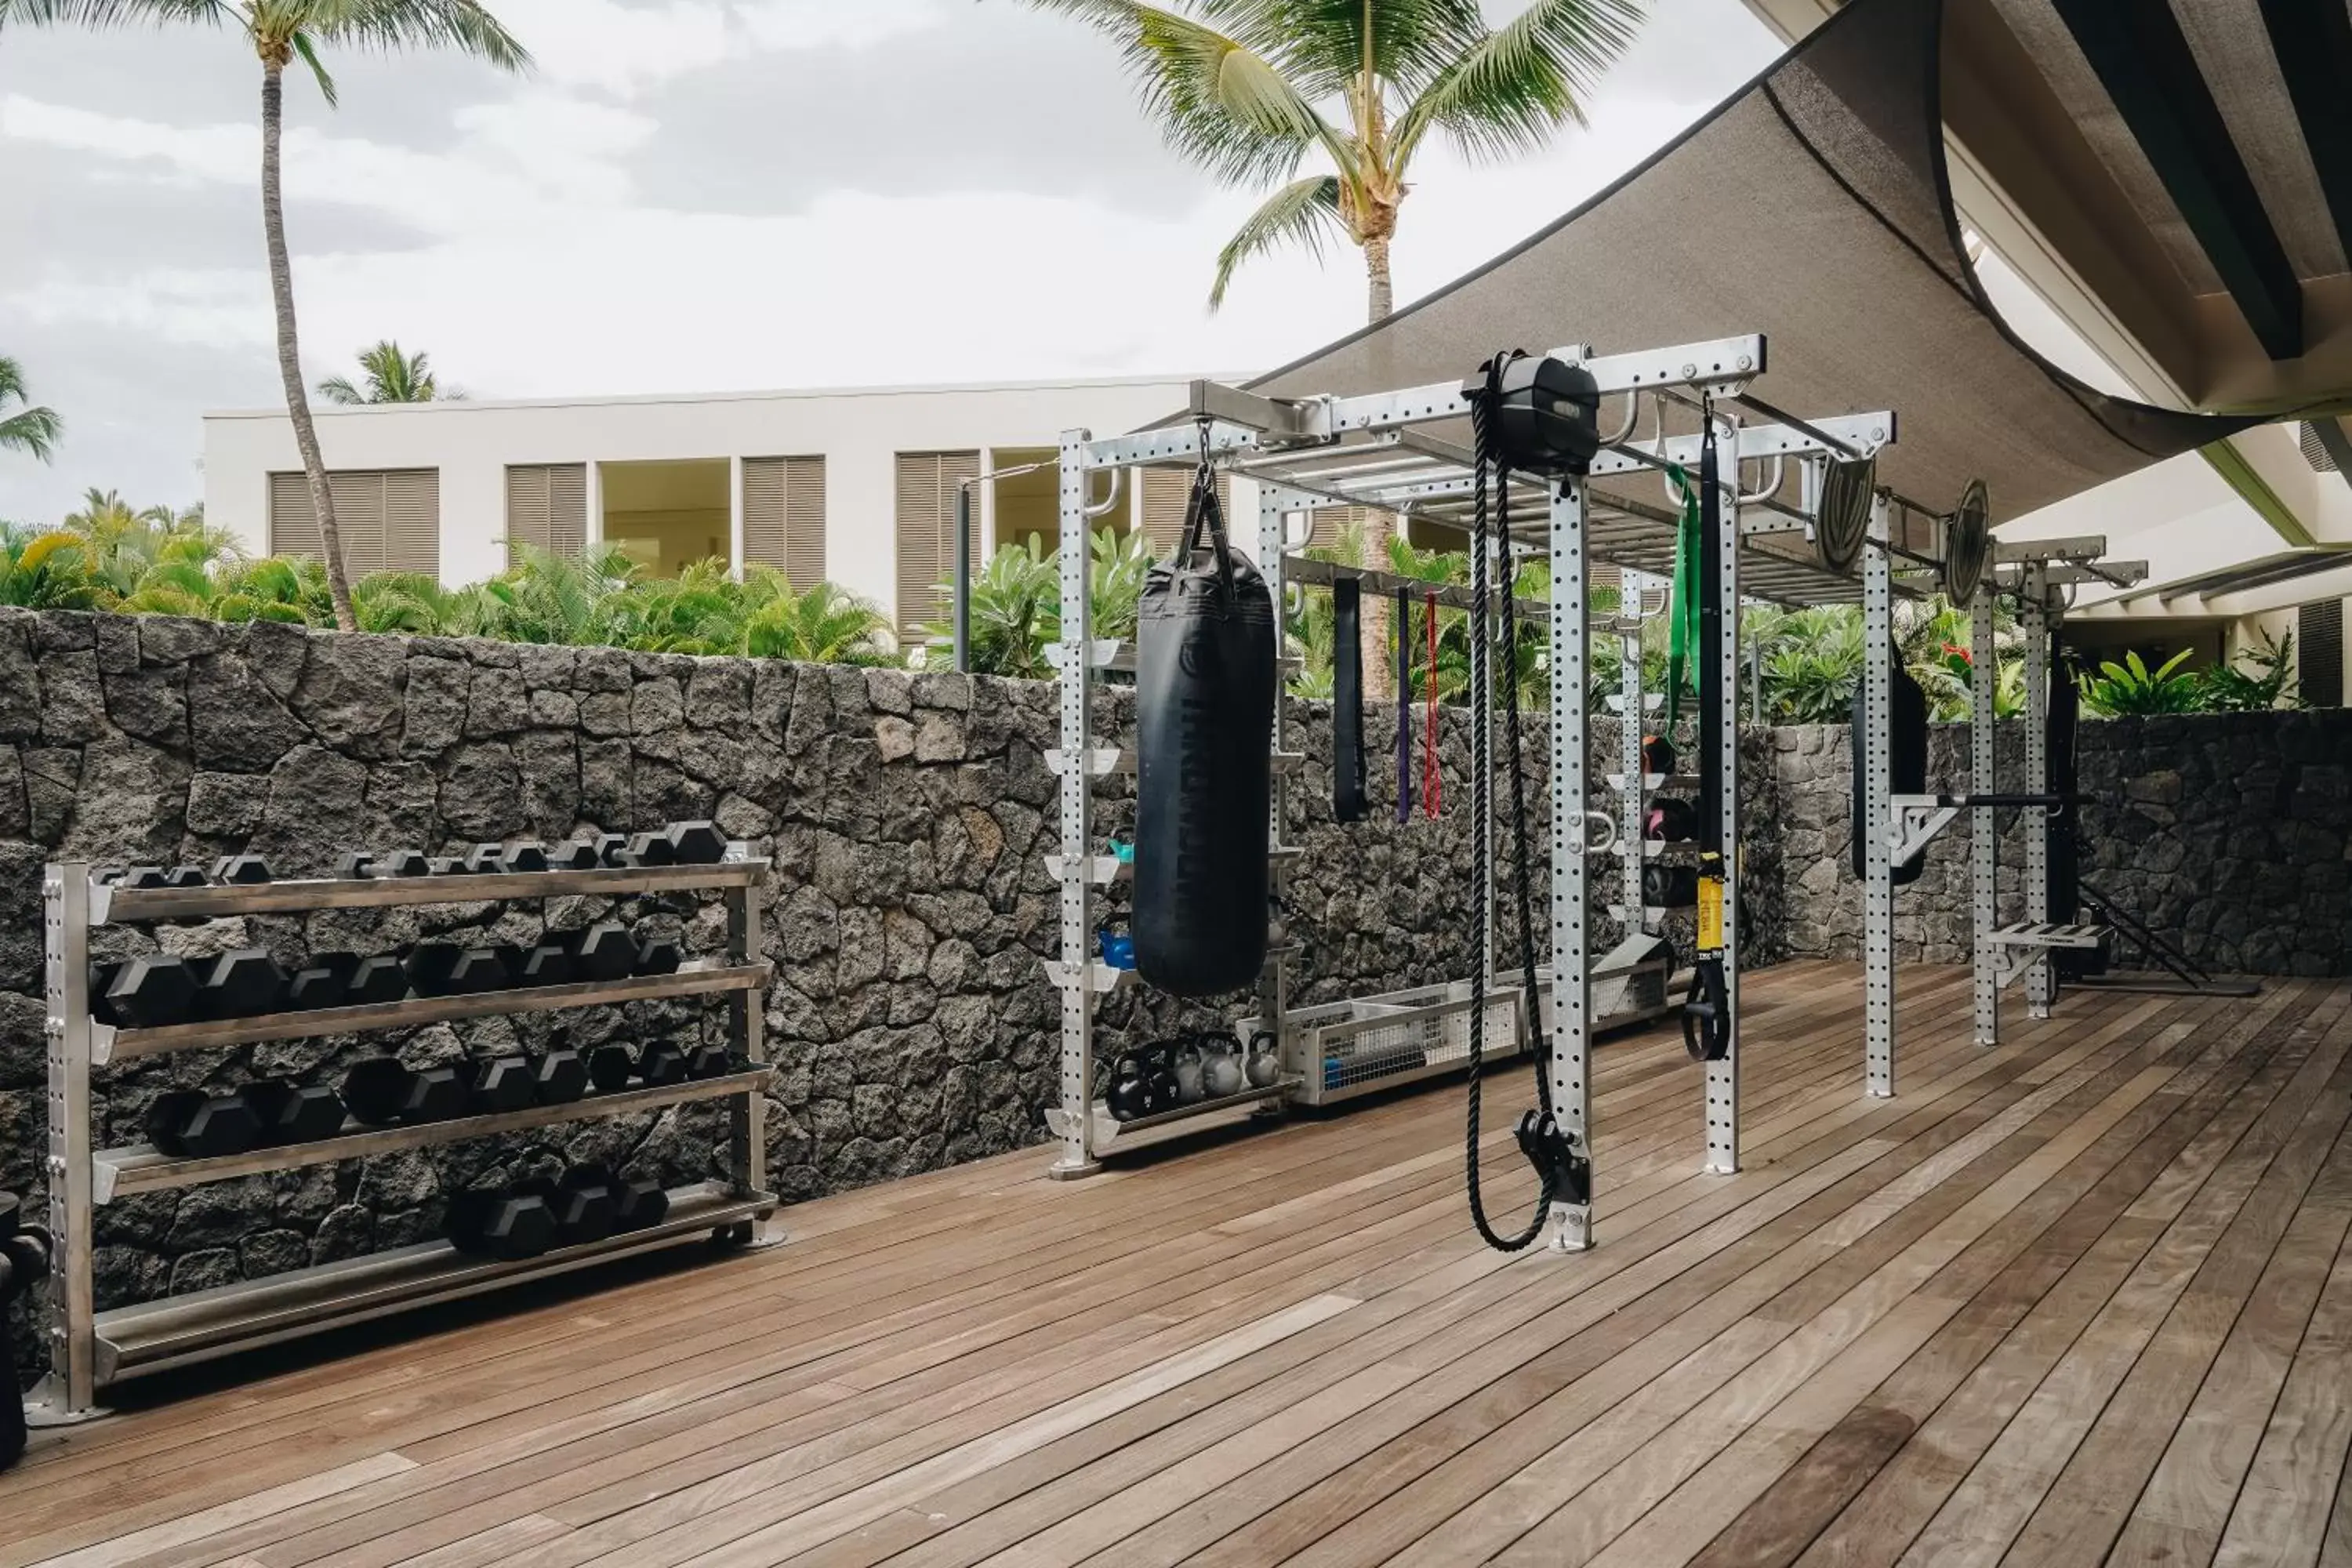 Fitness centre/facilities in Mauna Lani, Auberge Resorts Collection